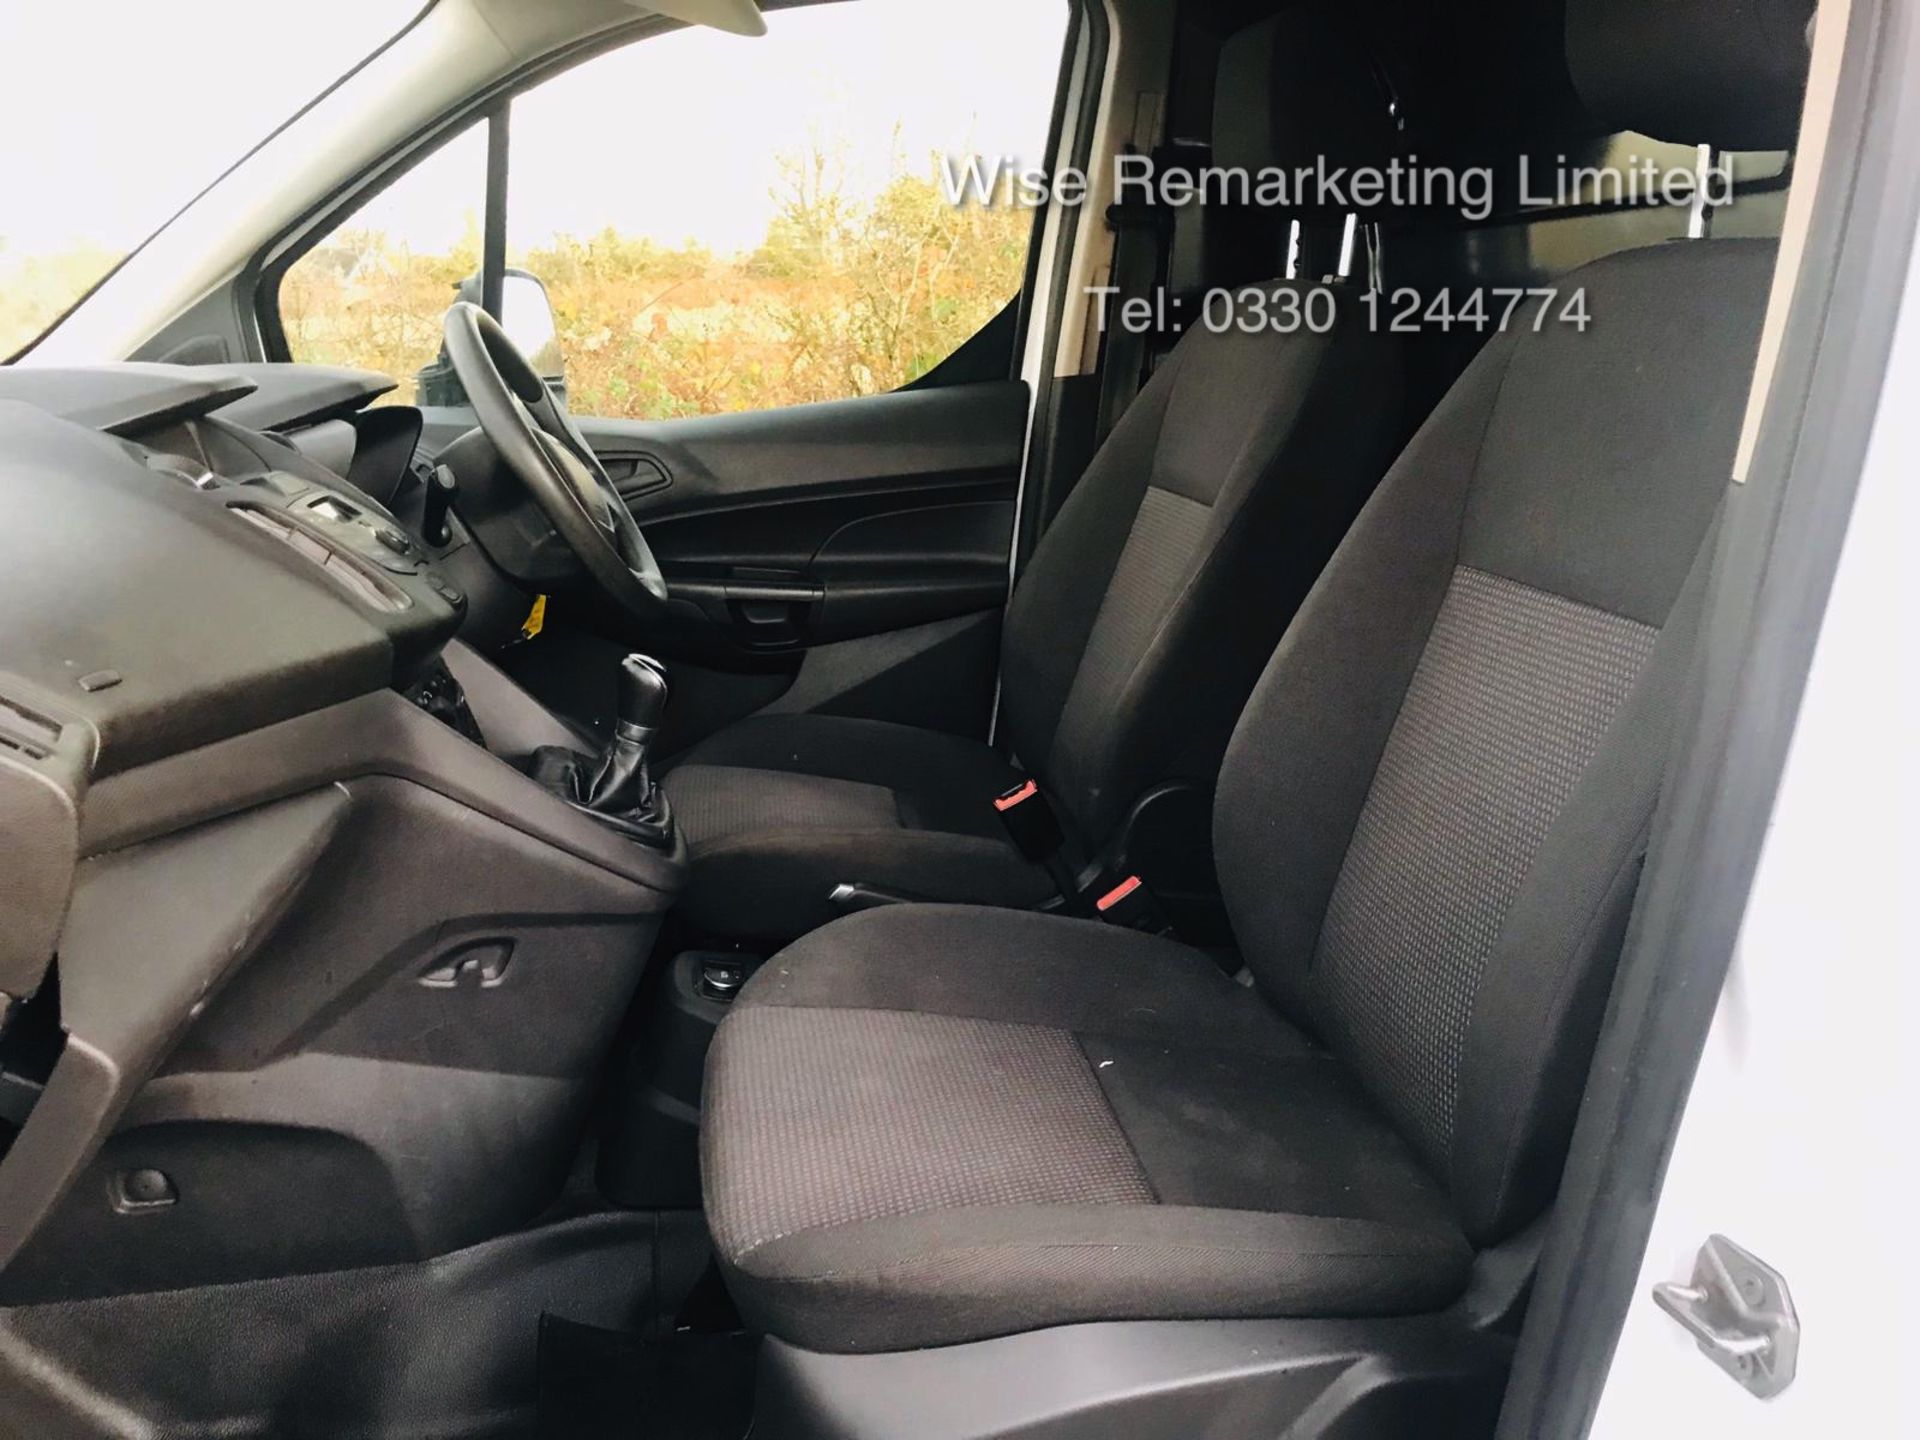 Ford Transit Connect 210 1.6 Eco-Tech Long - 2015 Model - Service History - Ply Lined - Image 9 of 15